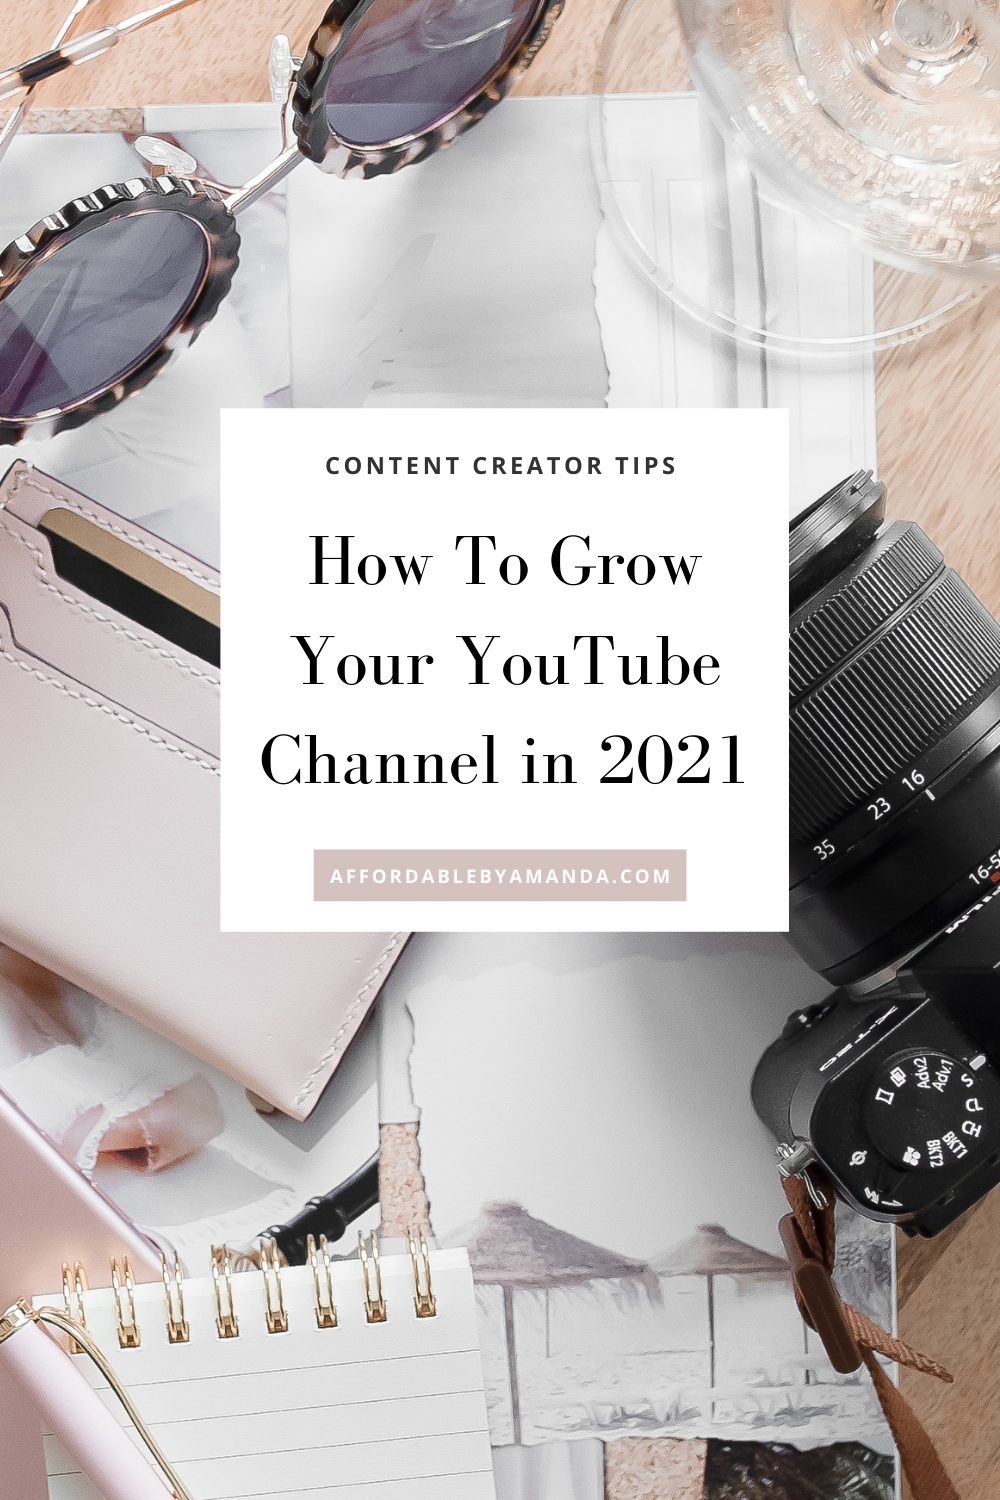 How To Grow Your YouTube Channel in 2021 - Affordable by Amanda